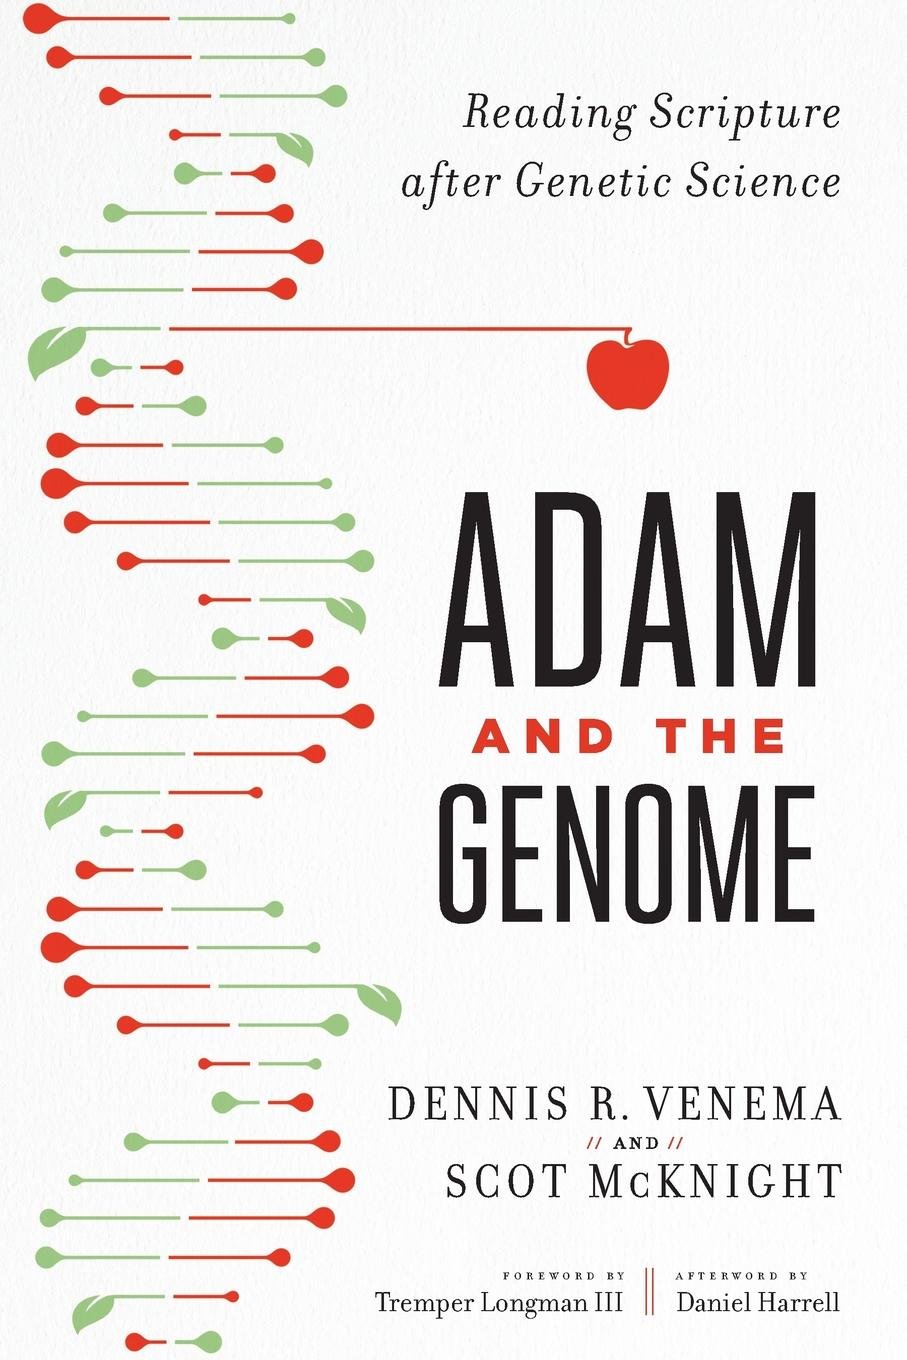 image of the book Adam and the Genome